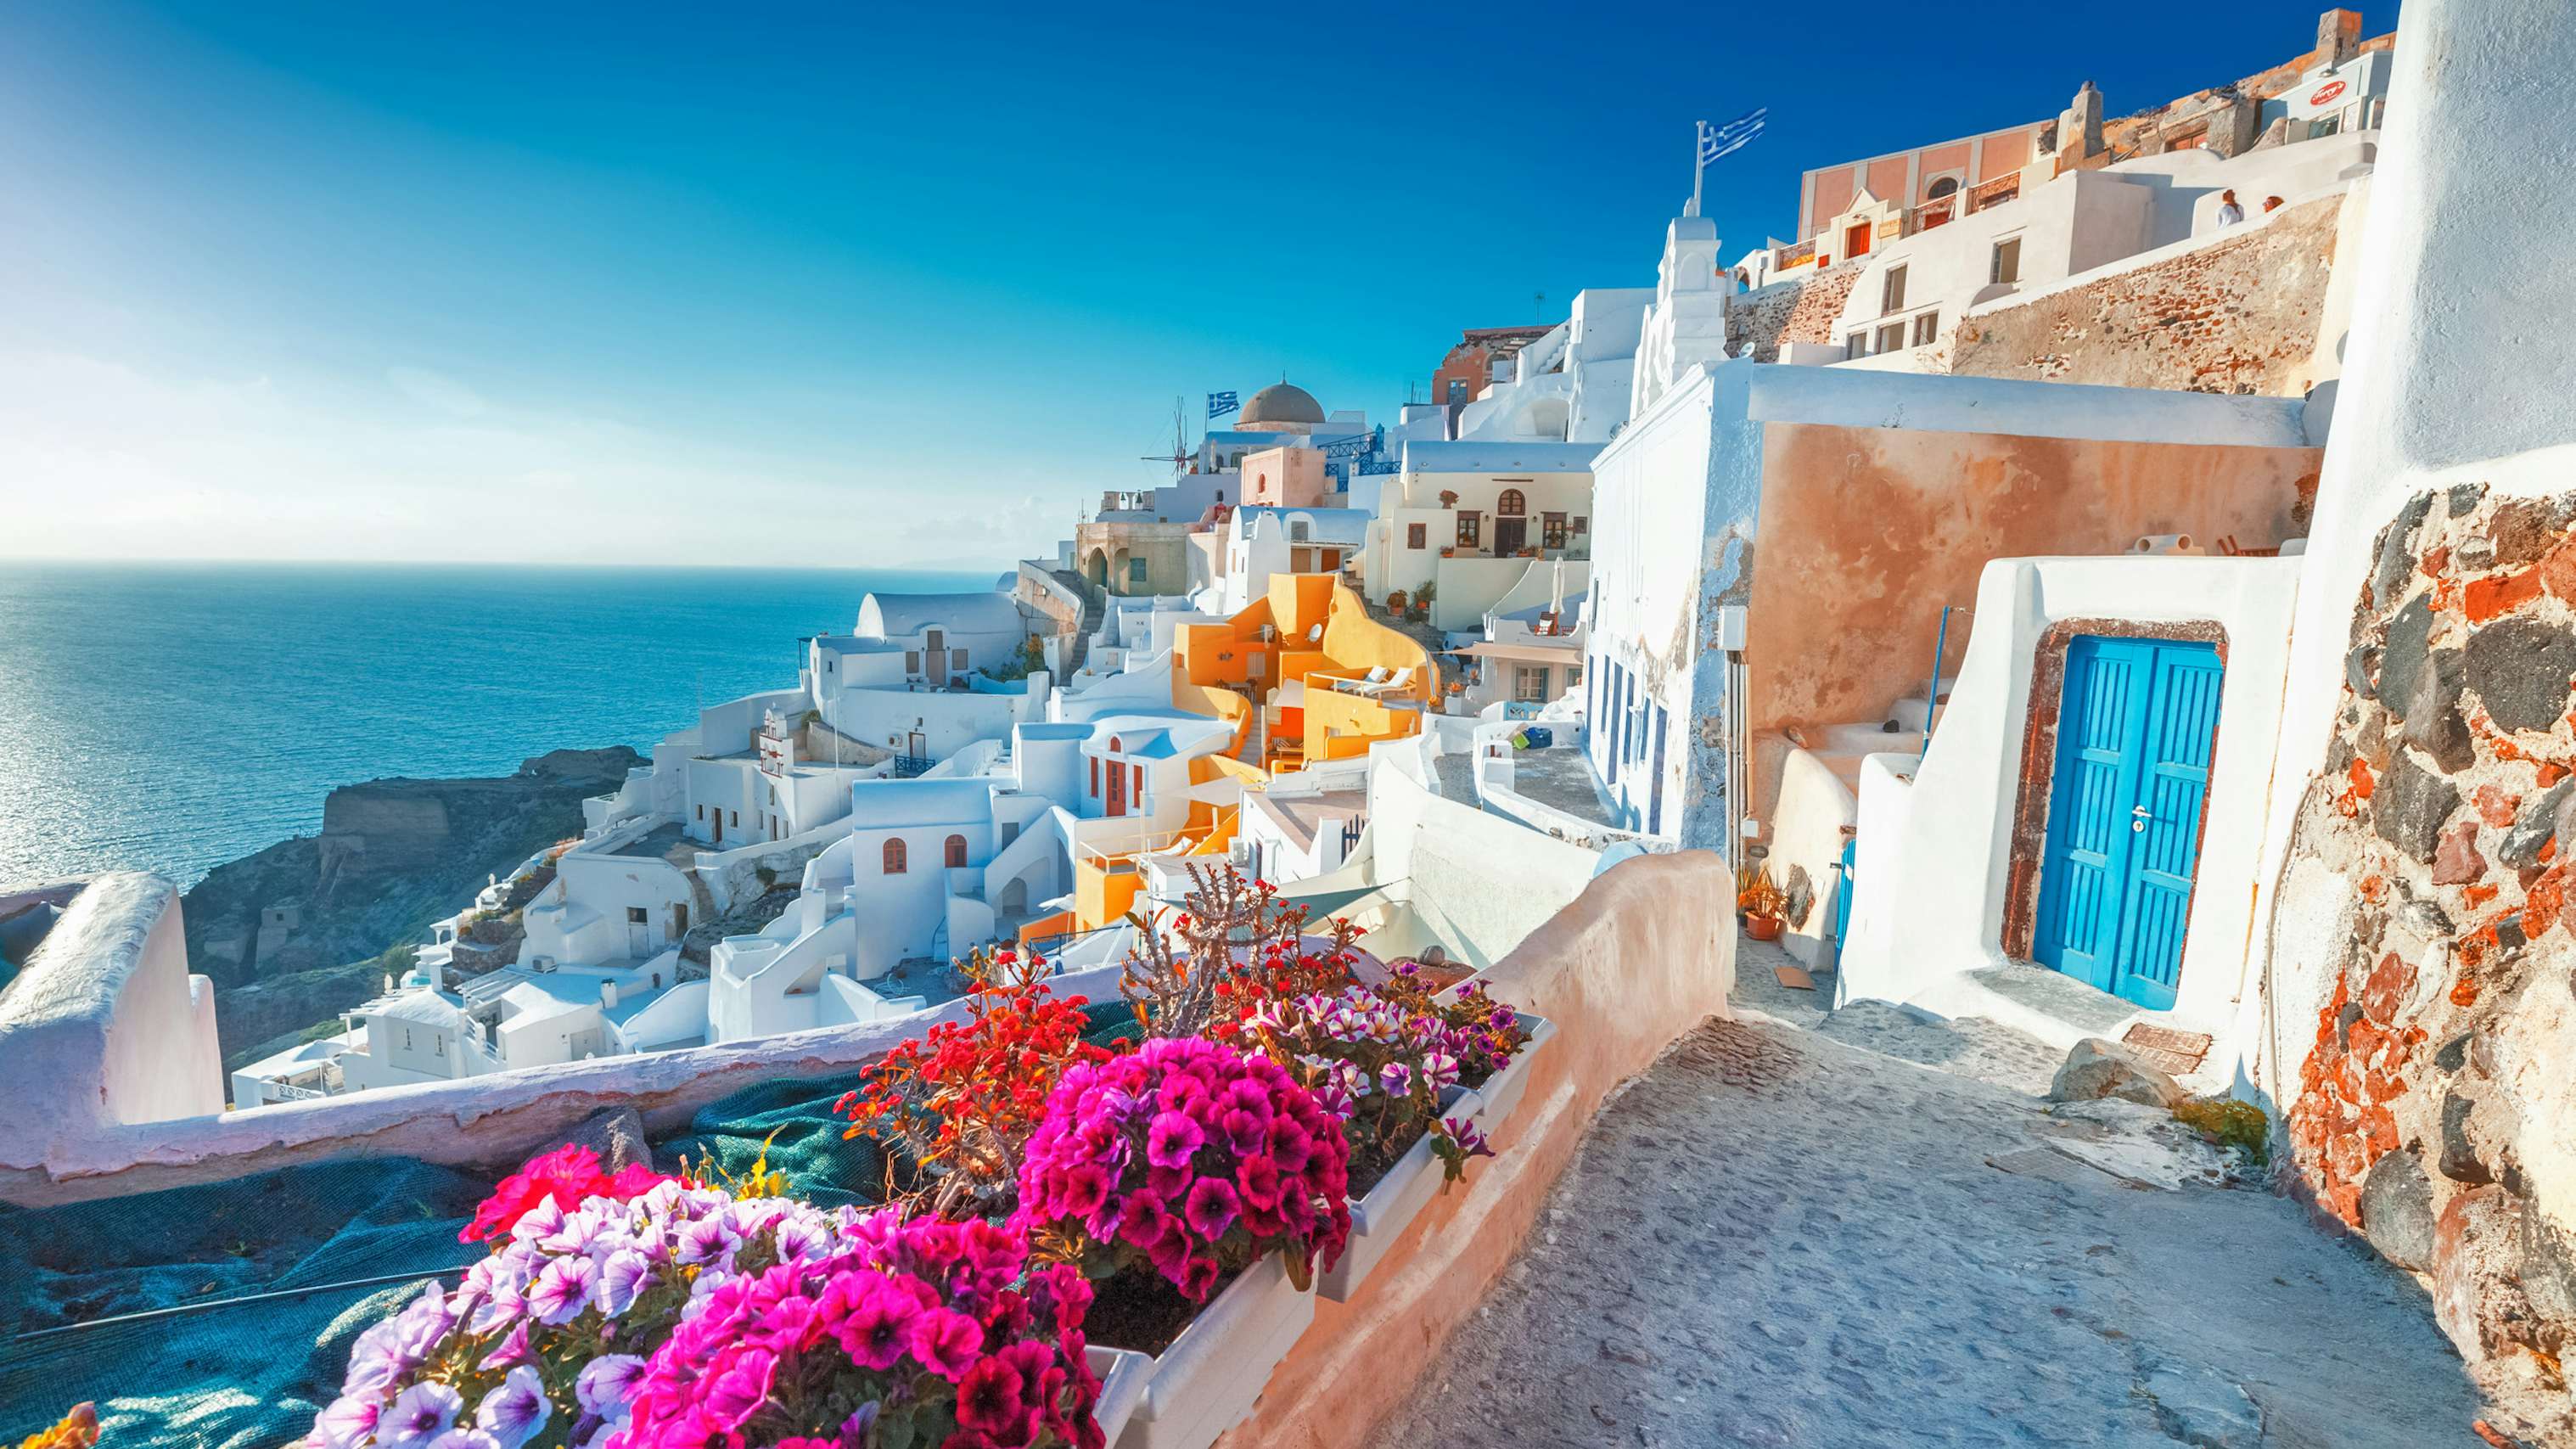 Charming Oia village in Santorini, with vibrant flowers and classic Cycladic architecture, a prime yacht charter stop.